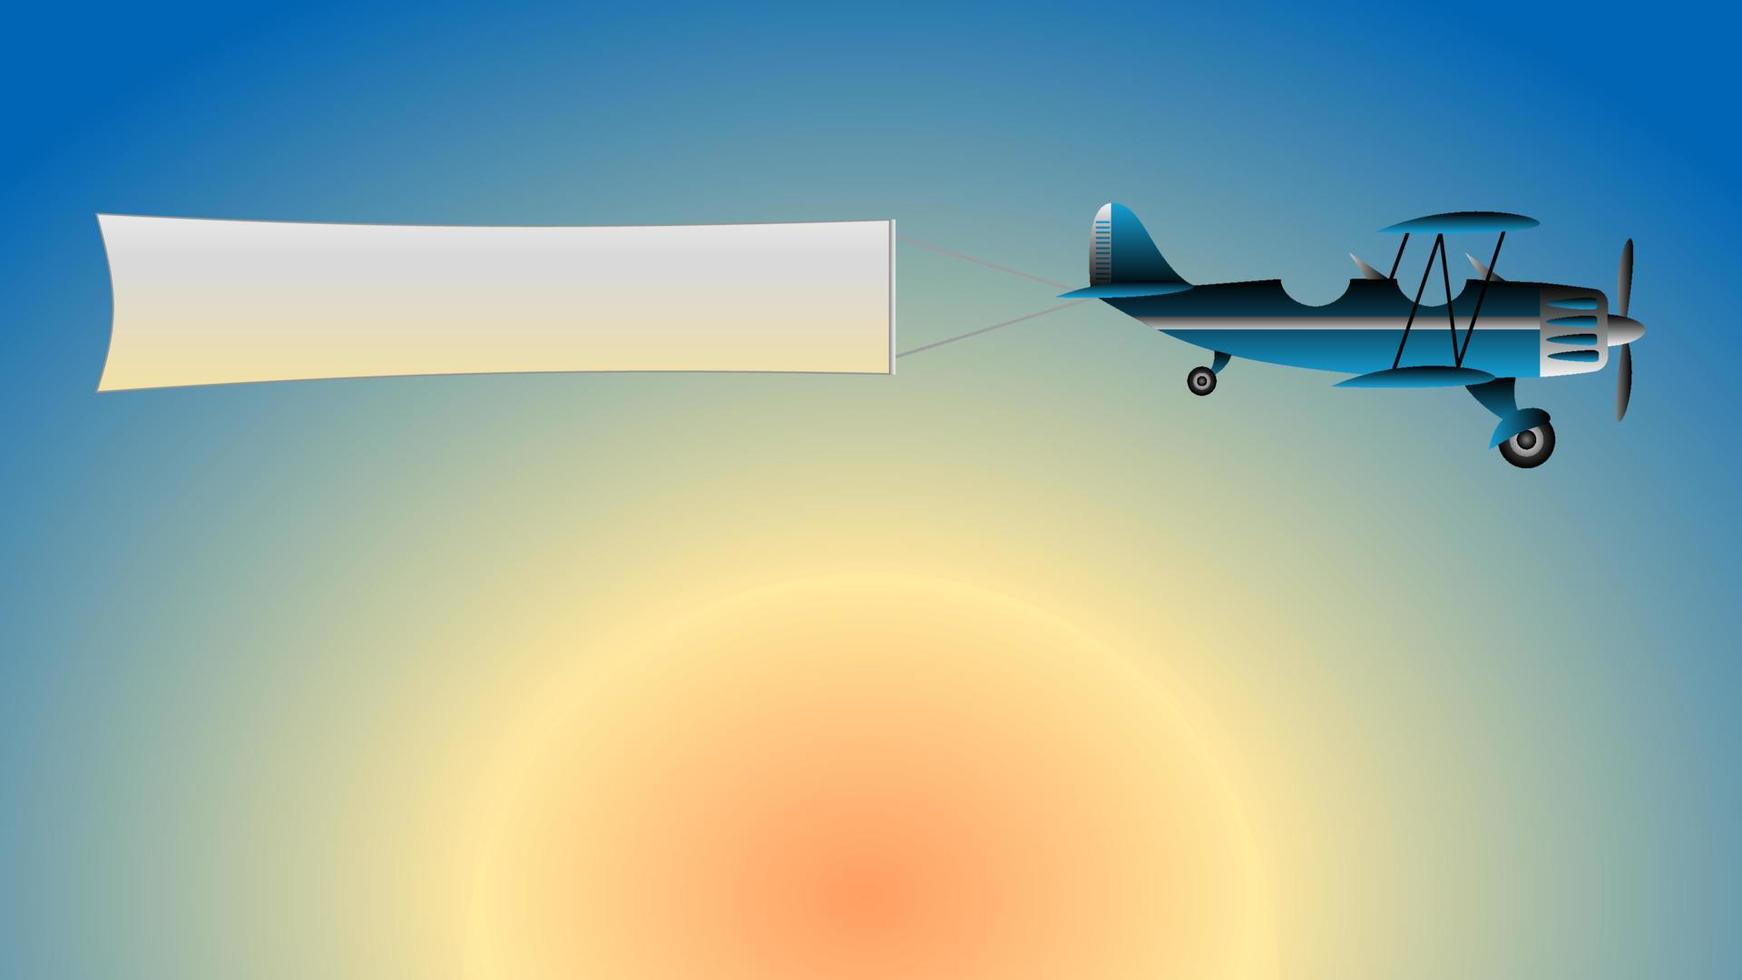 A blue biplane with an advertising poster is flying against the sunset background. An airplane against the sky. vector